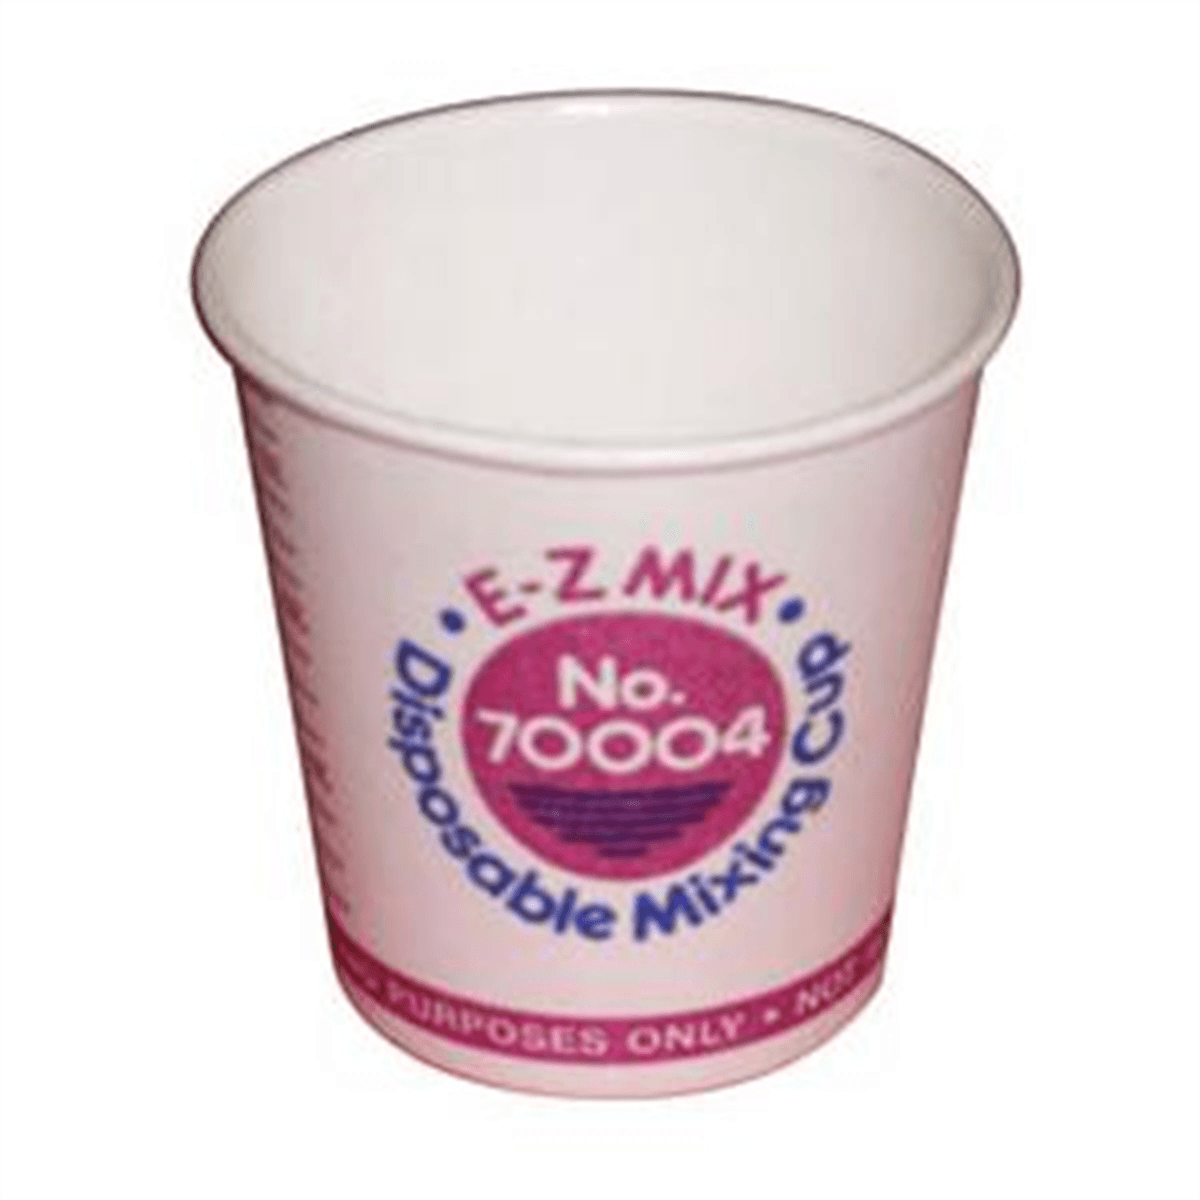 70004 1/4 PINT DISPOSABLE MIXING CUPS 400/BOX